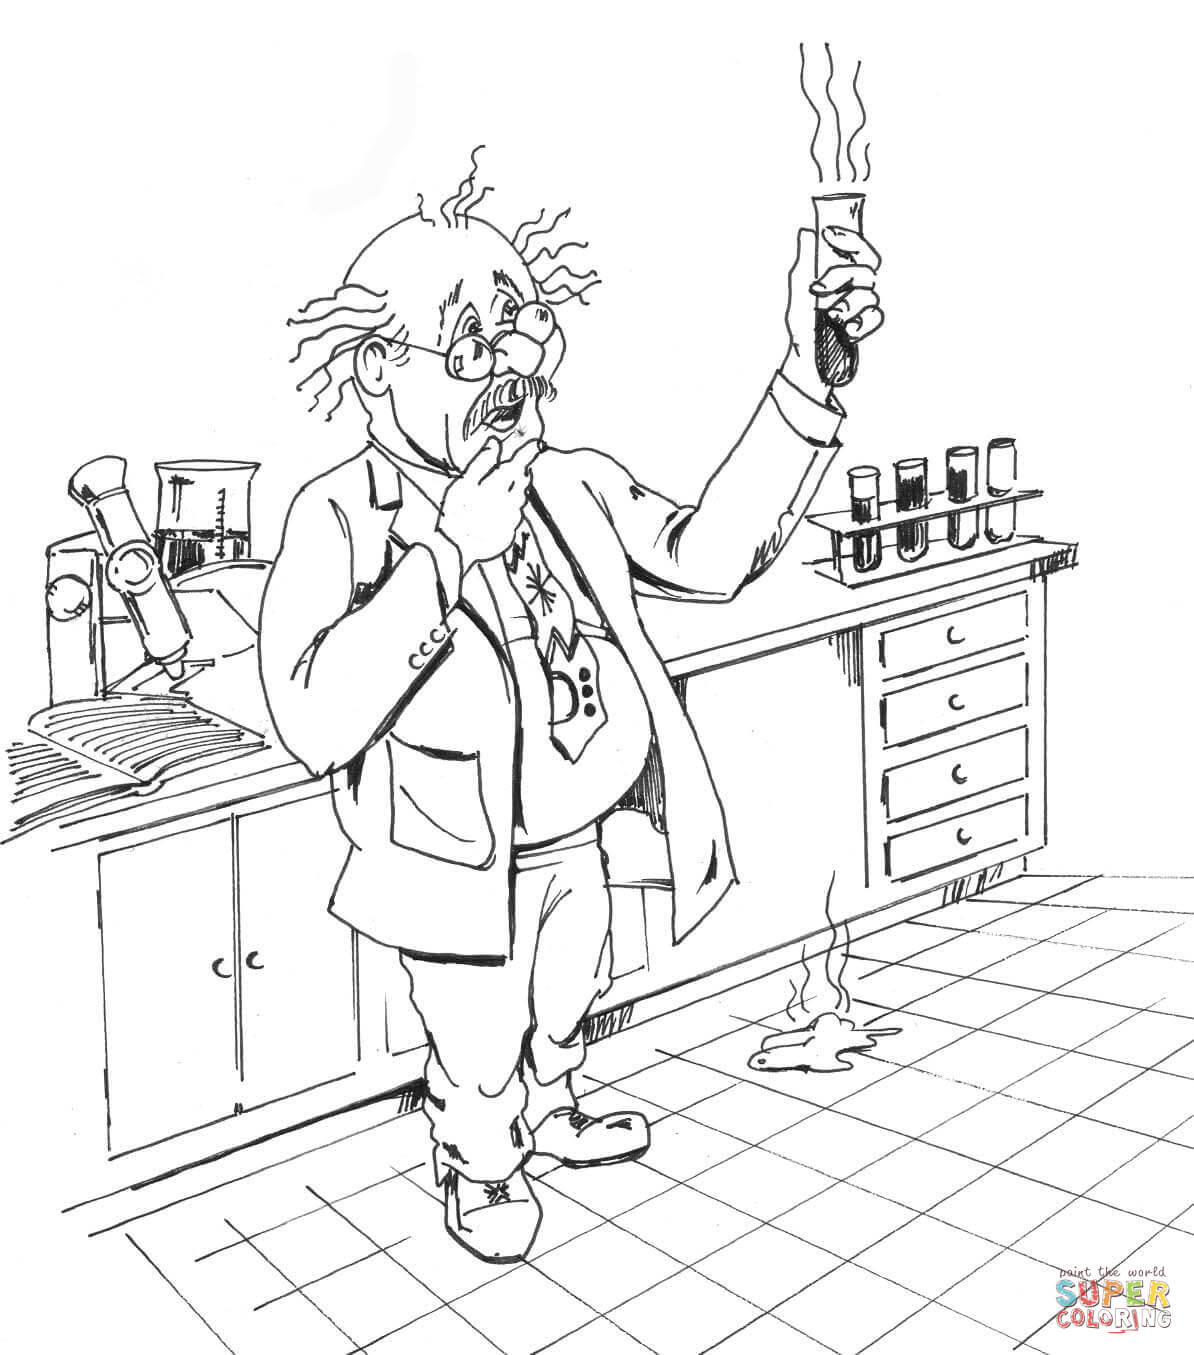 Scientist Coloring Sheet
 Chemical Scientist coloring page